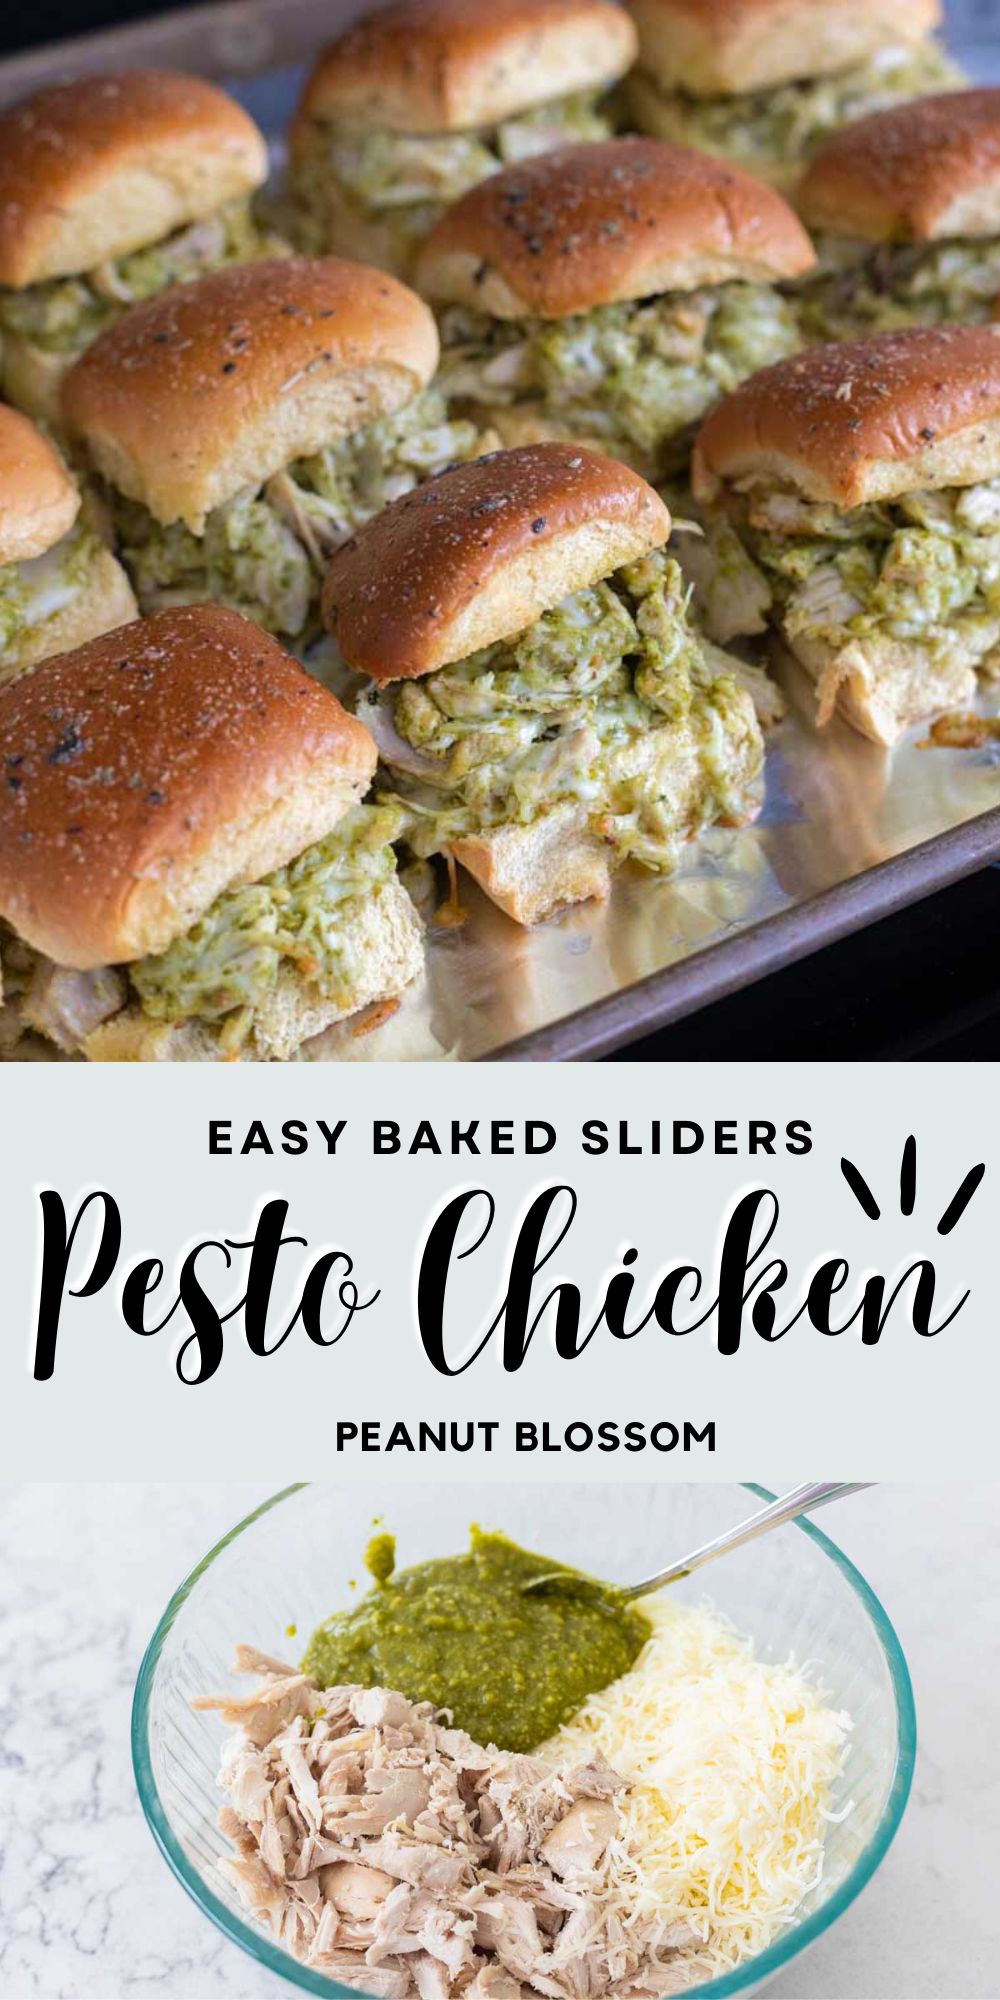 The photo collage shows the baked pesto chicken sliders on a sheet pan next to a photo of the pesto chicken filling being mixed together in a bowl.